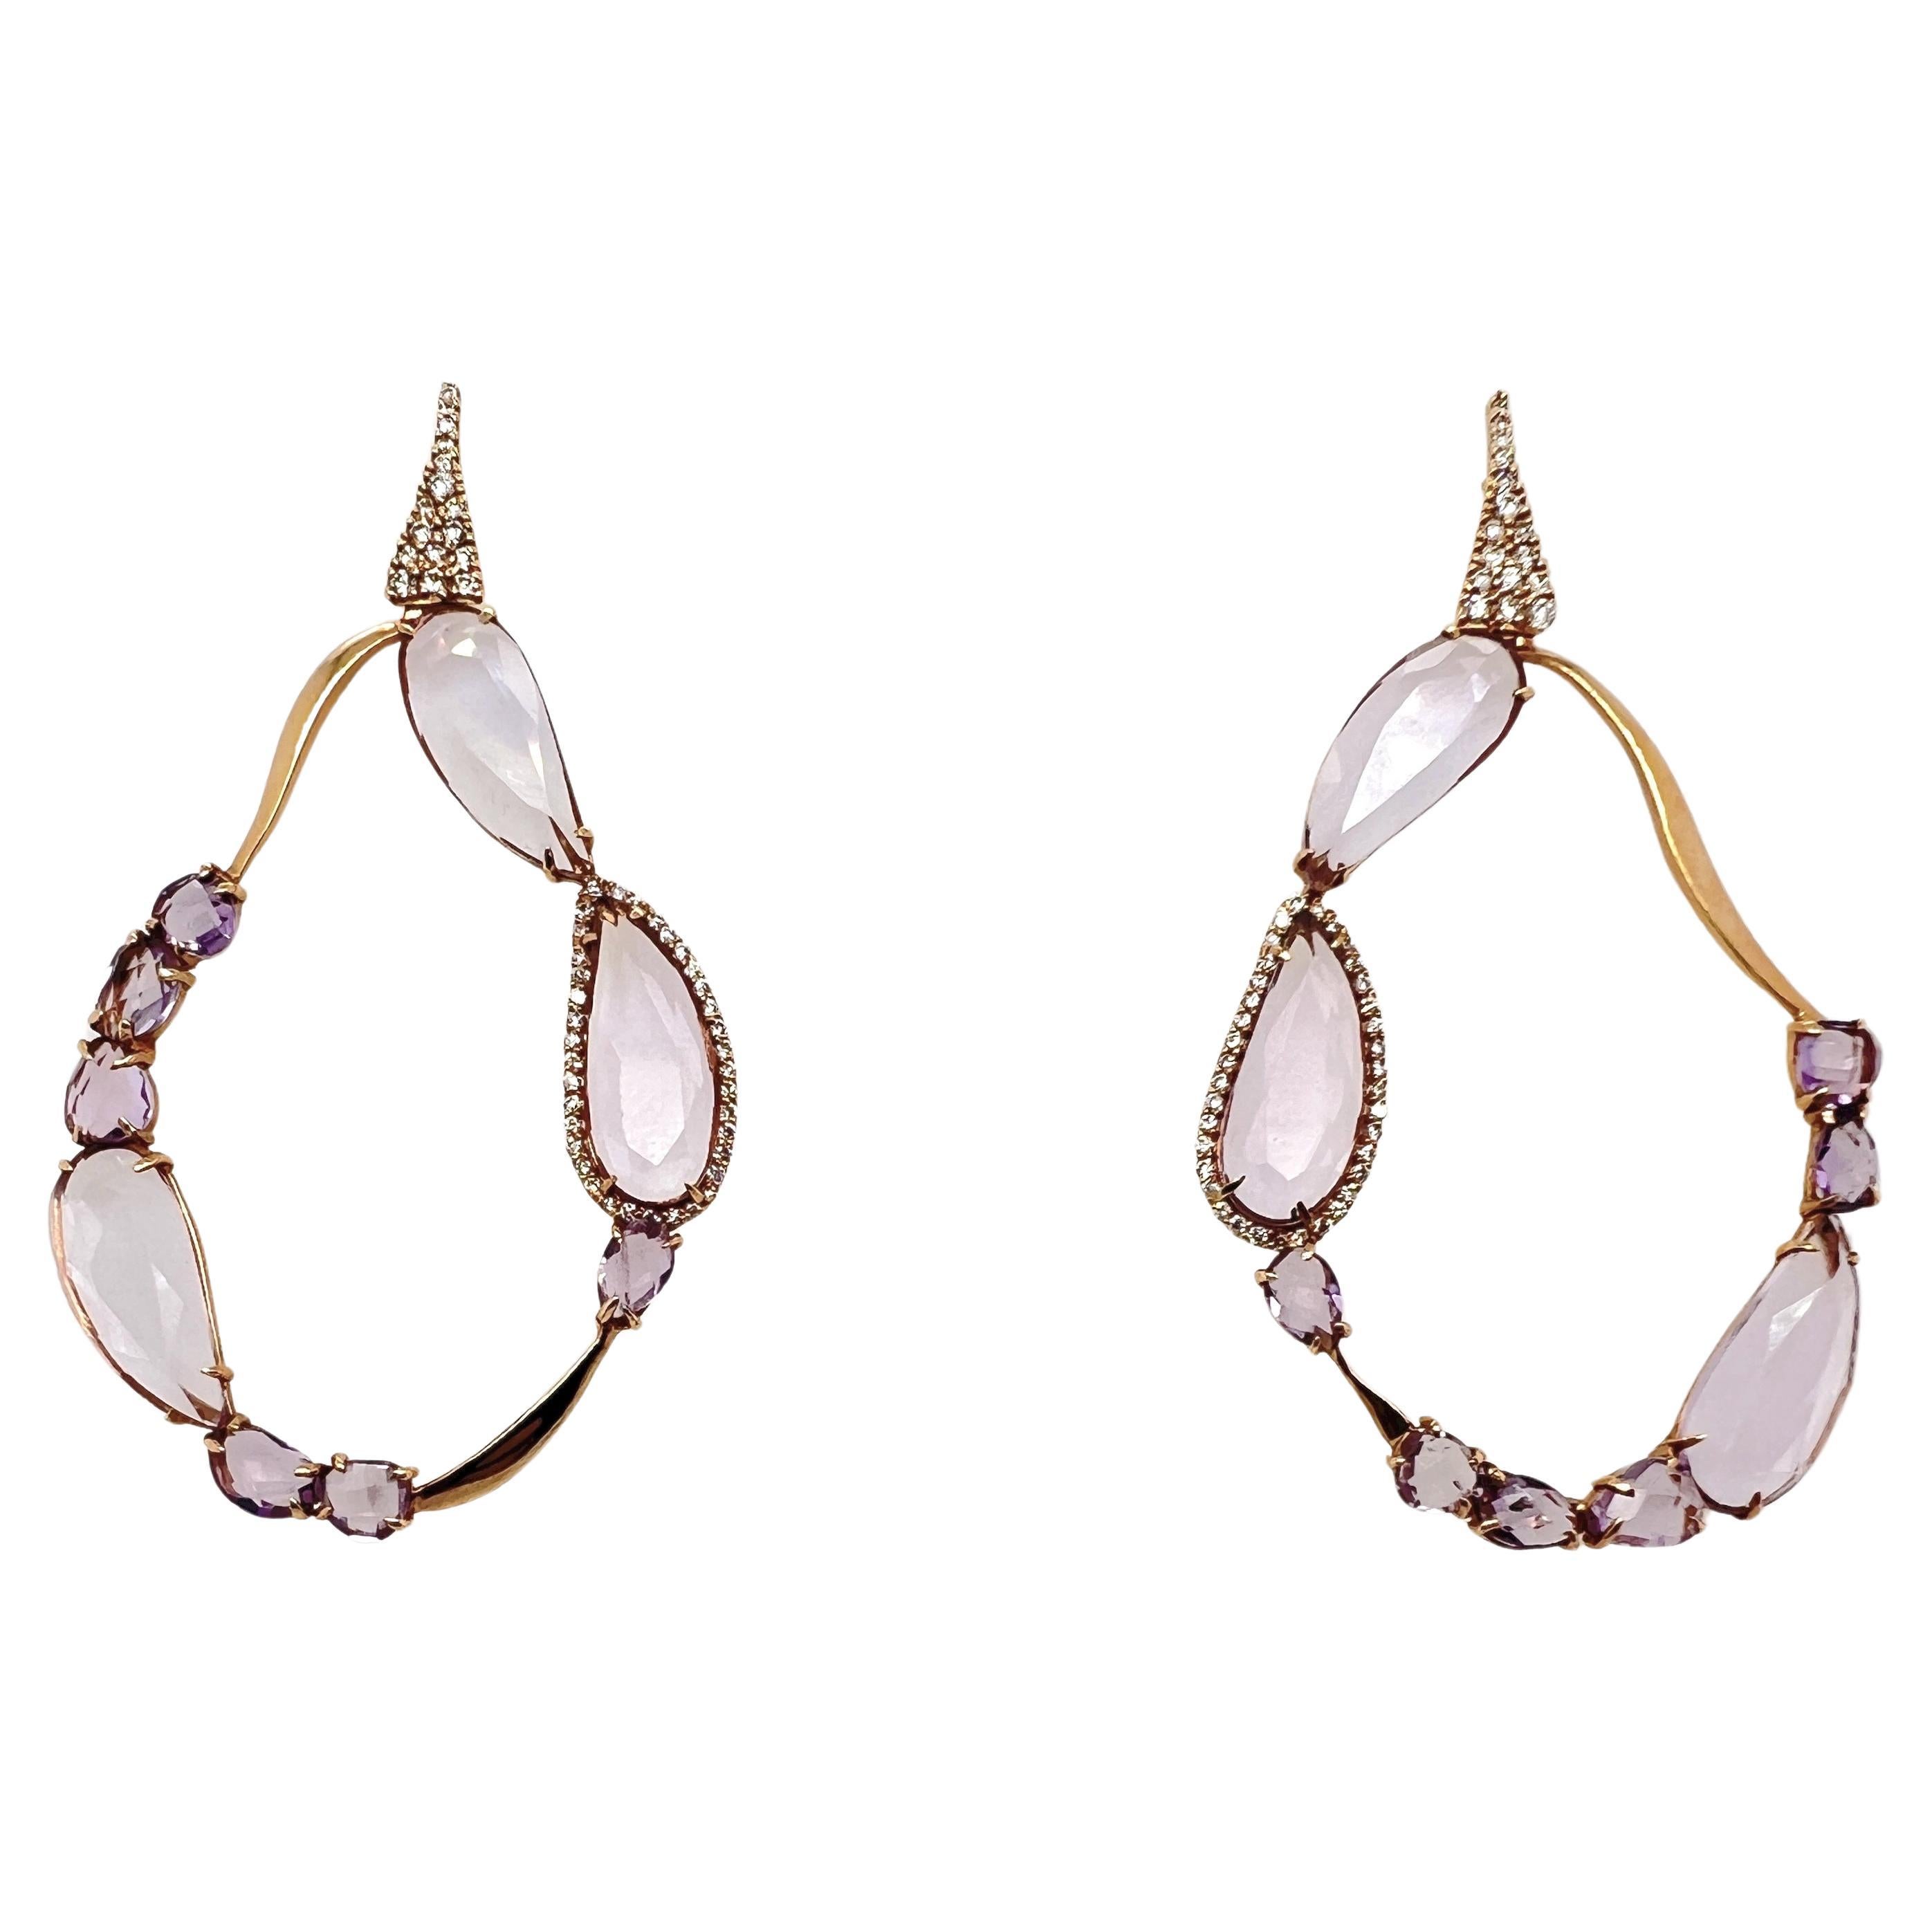 18kt Pink Gold Earrings with Smoky quartz drops and natural diamonds